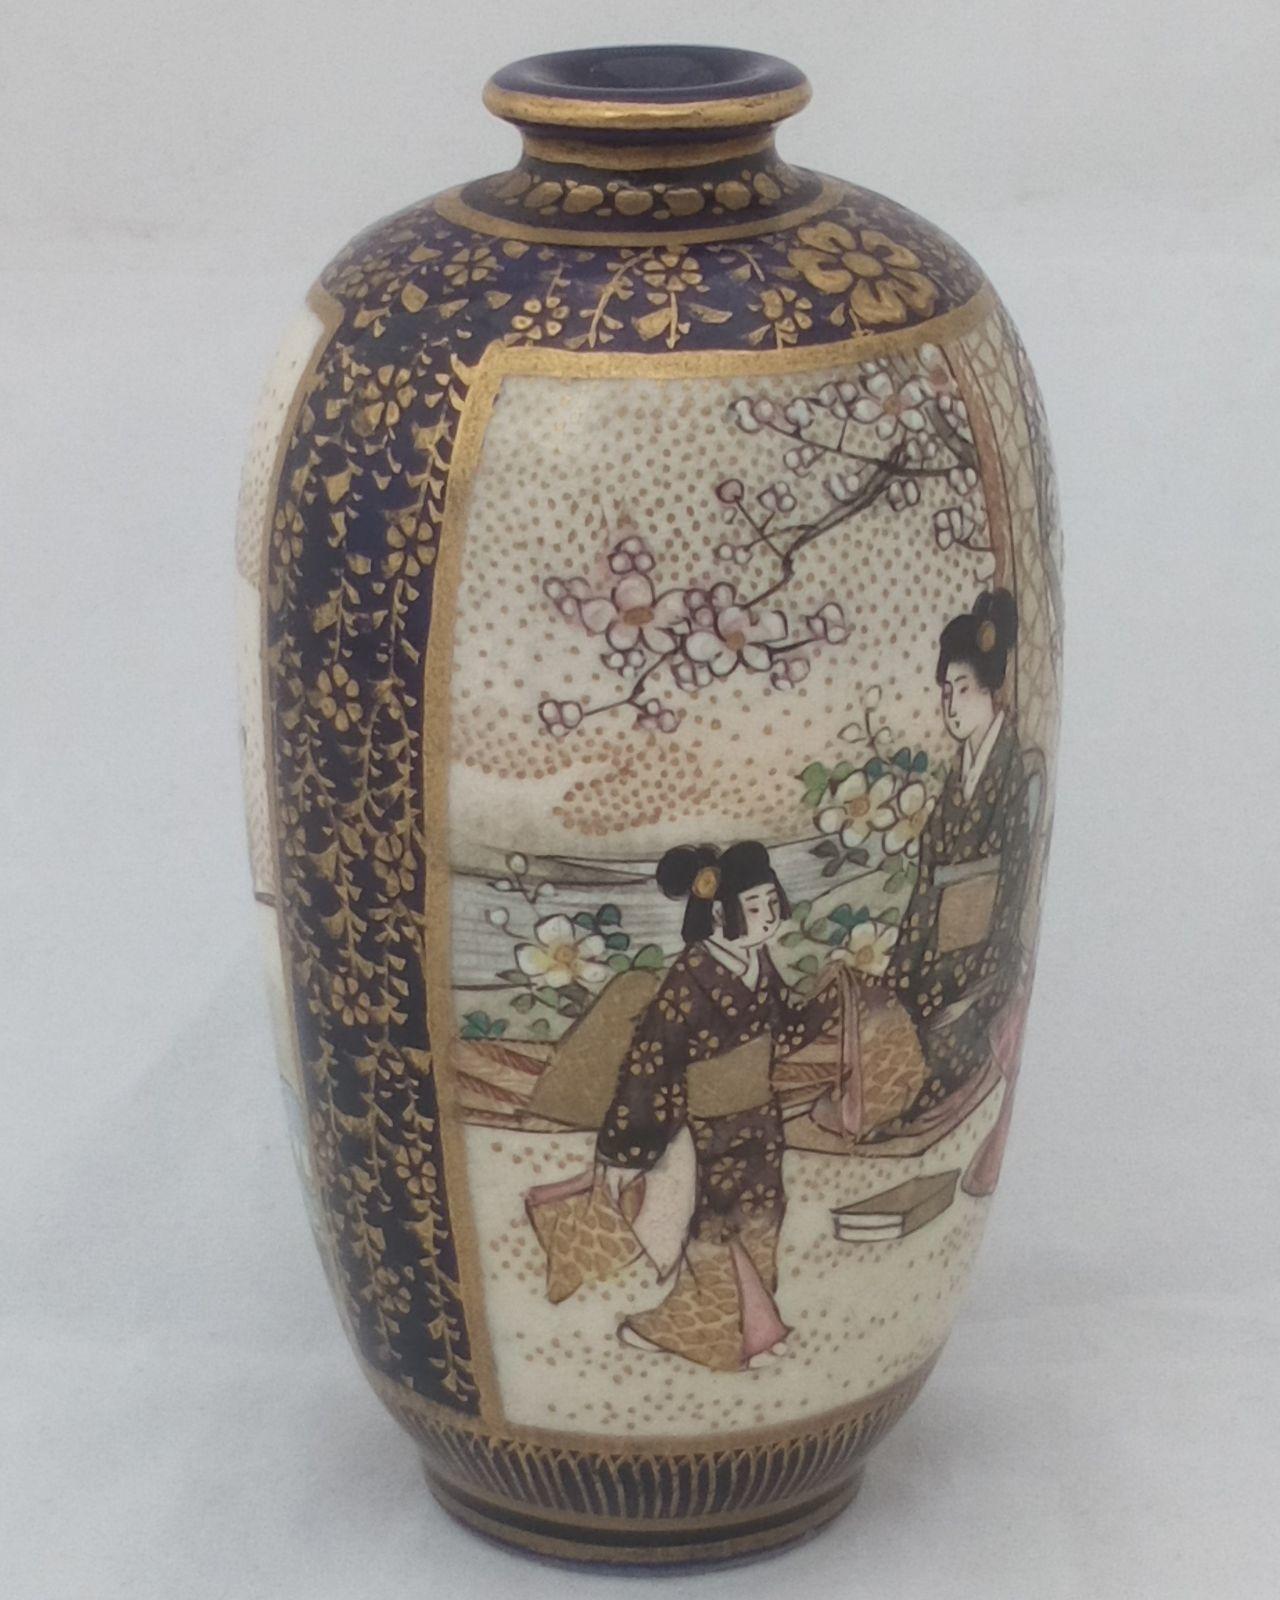 Small antique Japanese Satsuma vase hand painted scenes the base is Marked 光山 Kozan  dating from the Meiji period circa 1900